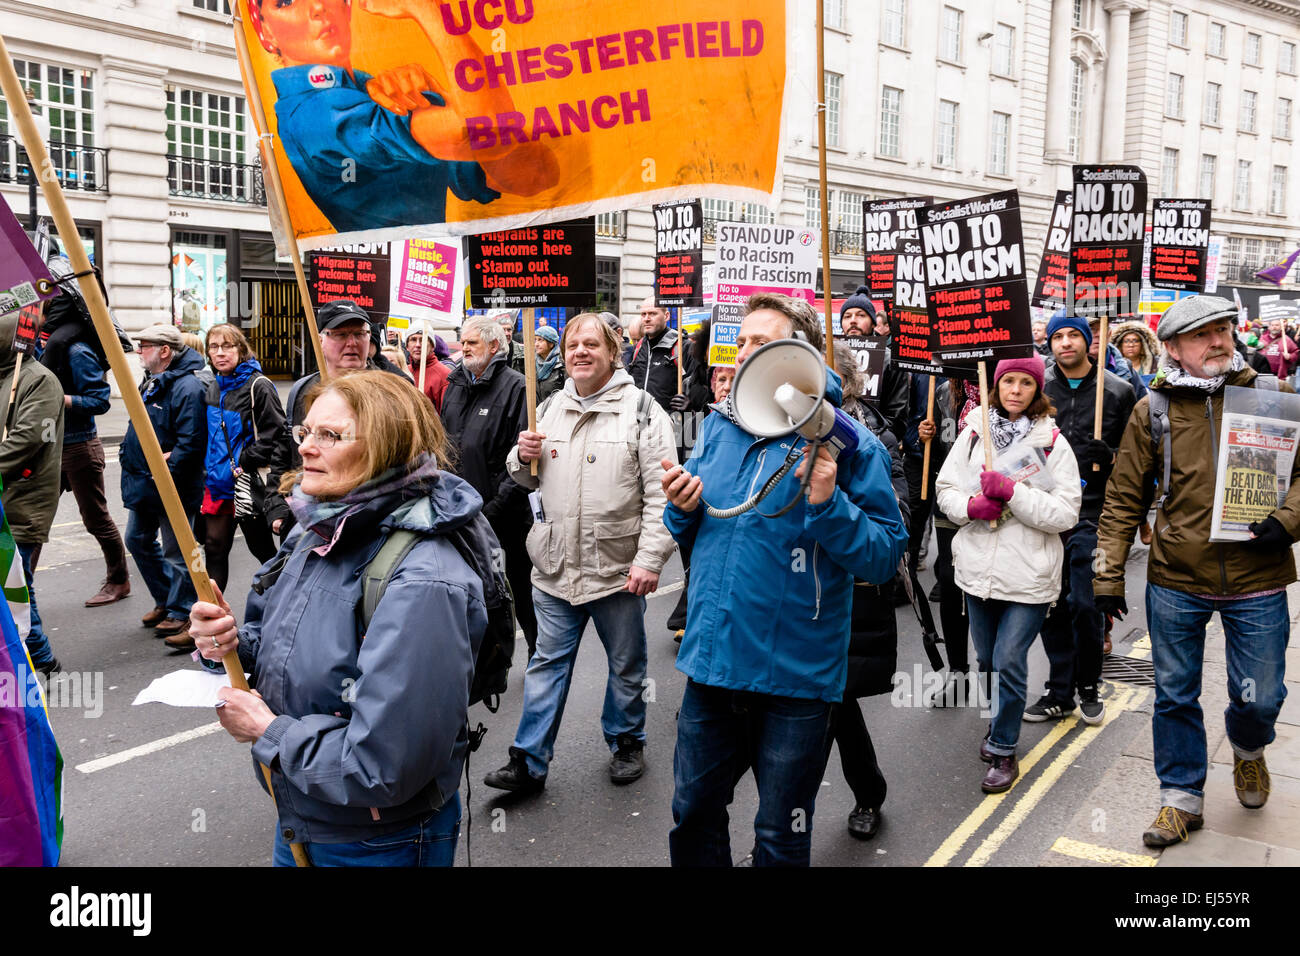 London, UK. 21st Mar, 2015. People marching through the streets of London in a march arranged by Unite Against Fascism (UAF) to 'Stand Up Against Racism' on UN Anti-Racism Day on 21st of March 2015. Credit:  Tom Arne Hanslien/Alamy Live News Stock Photo